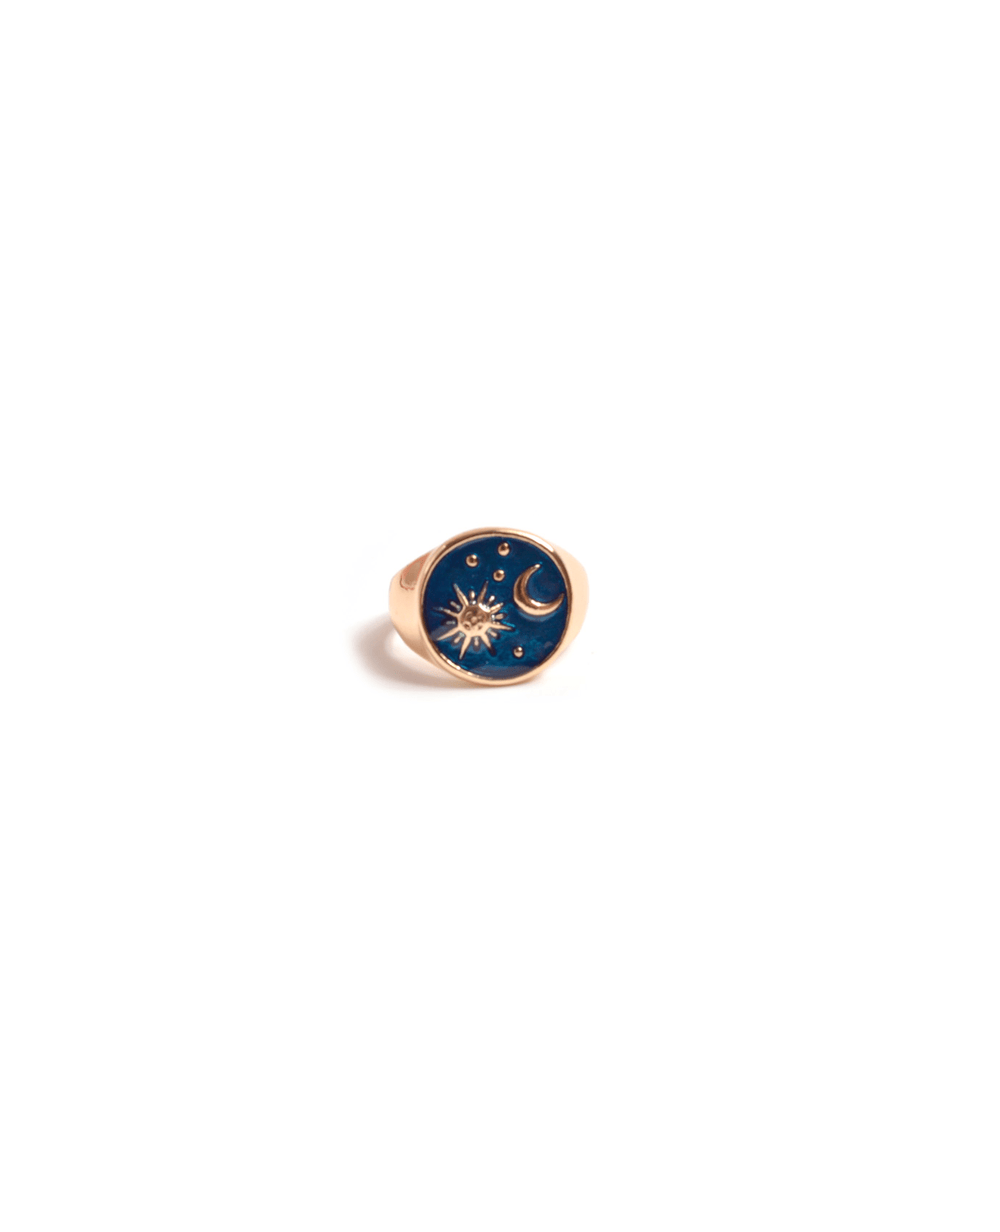 $1 Sun and Moon Ring